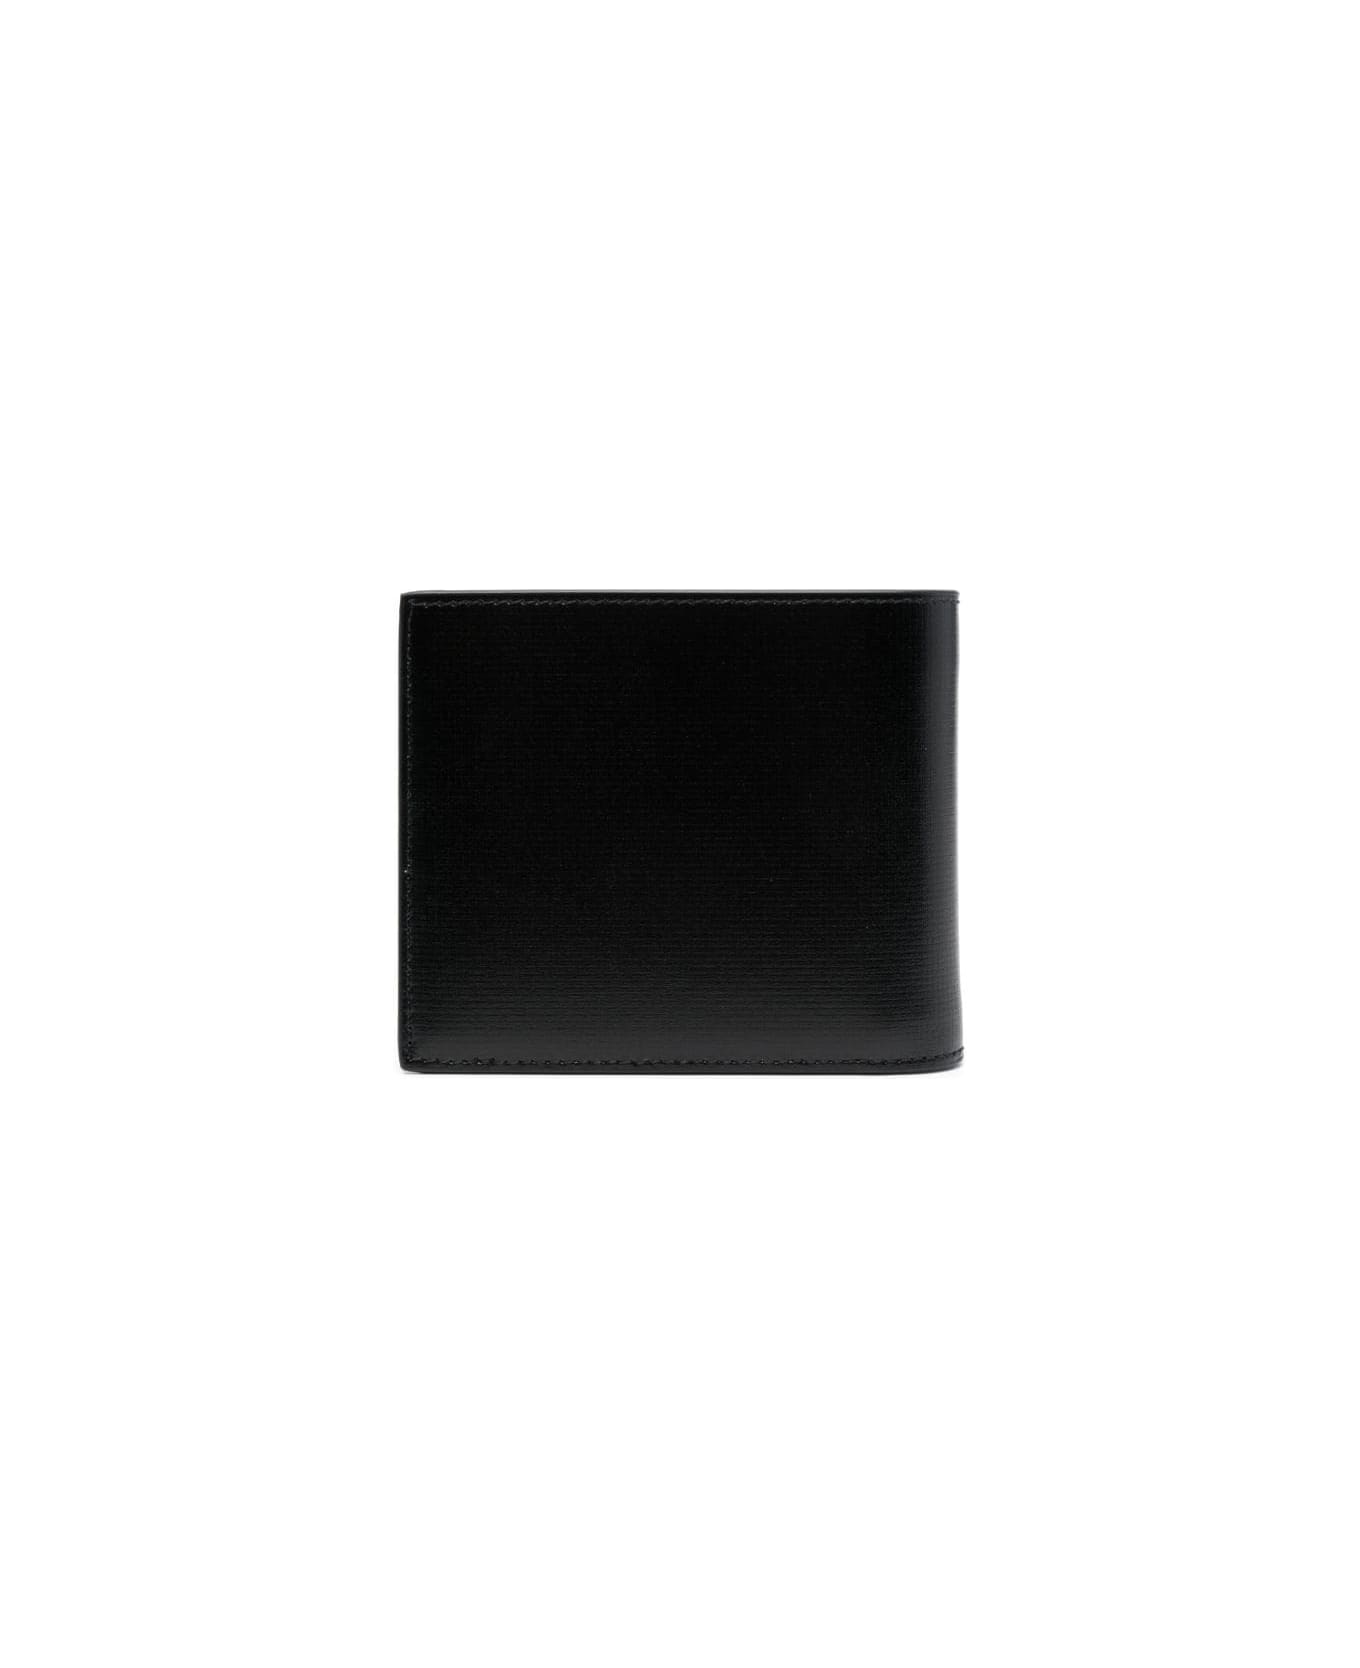 Givenchy Wallet In Black Classique 4g Leather - Black 財布